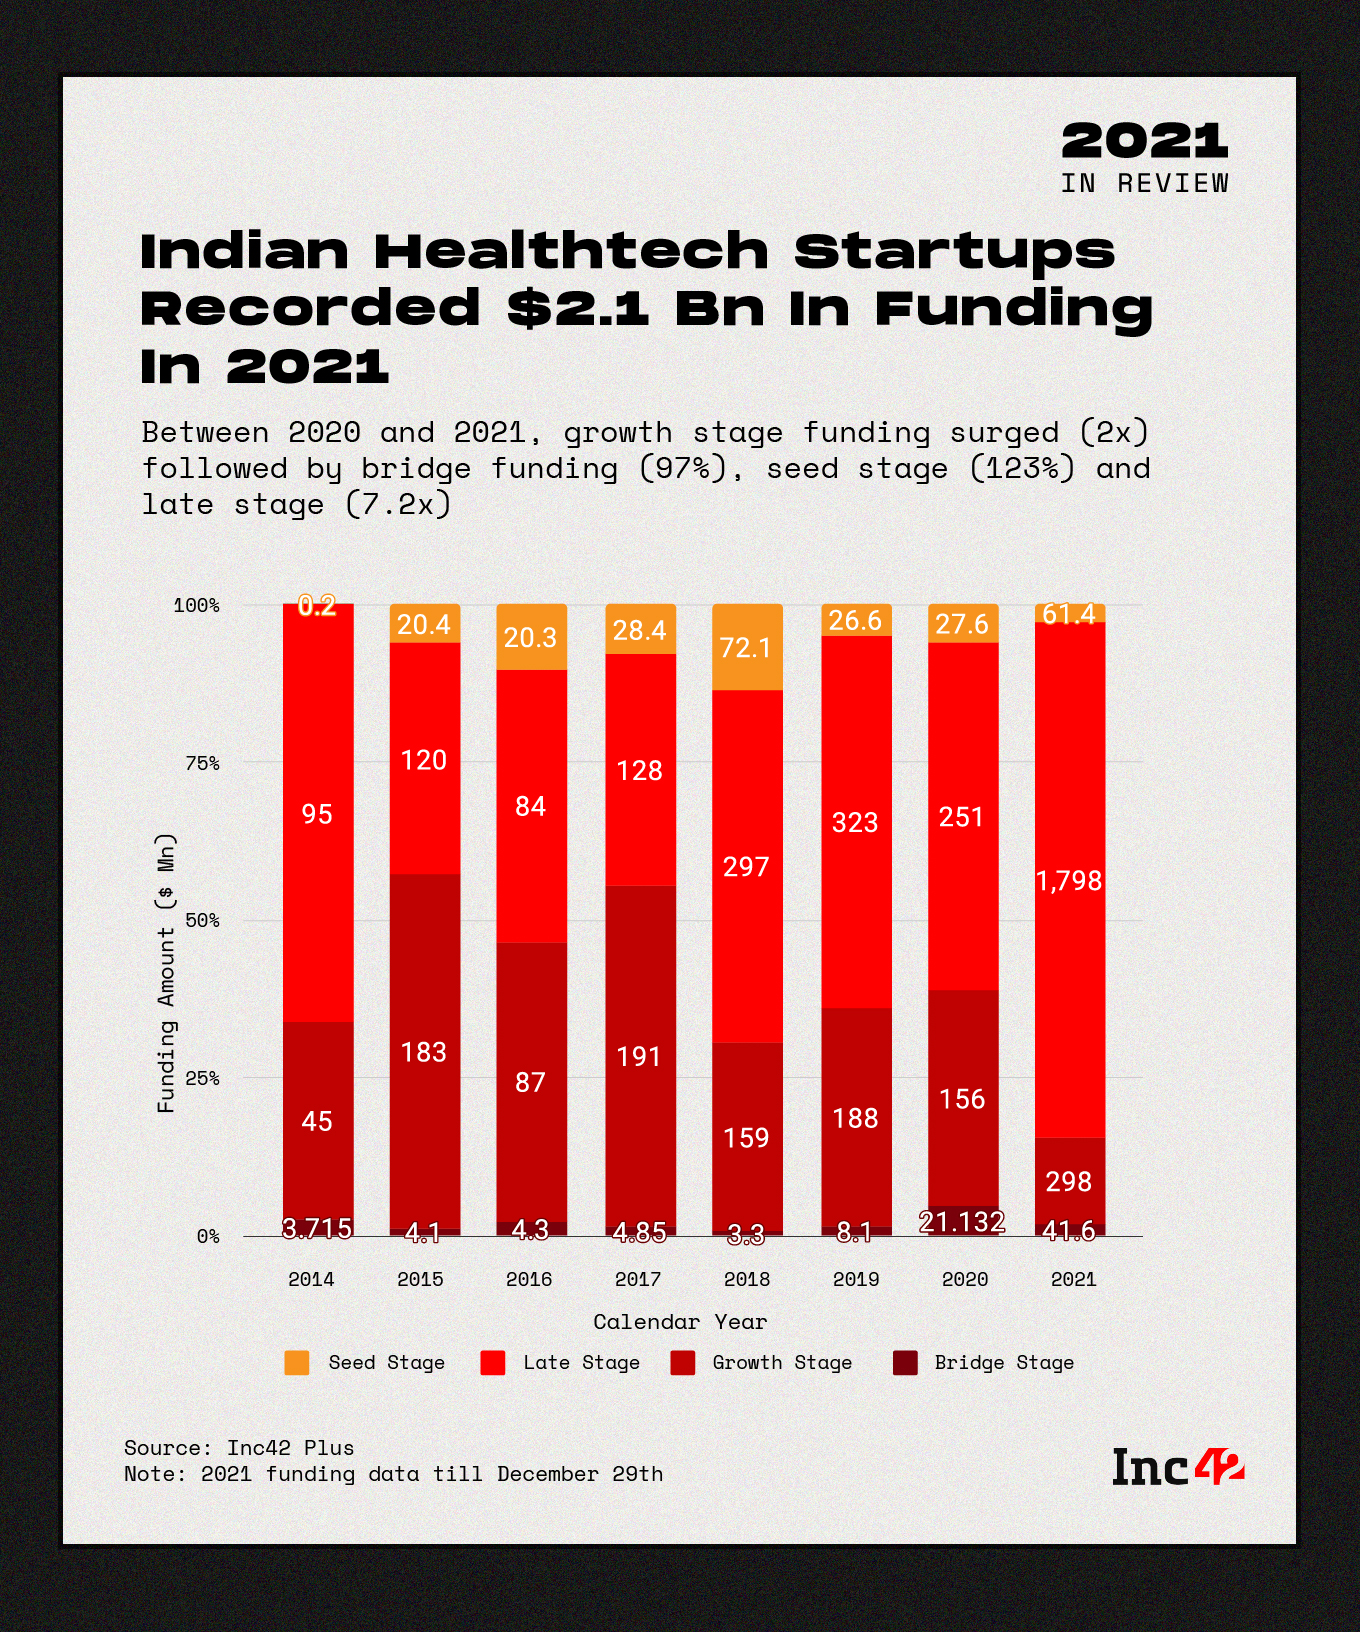 indian healthtech startups recorded $2.1 Bn in funding in 2021